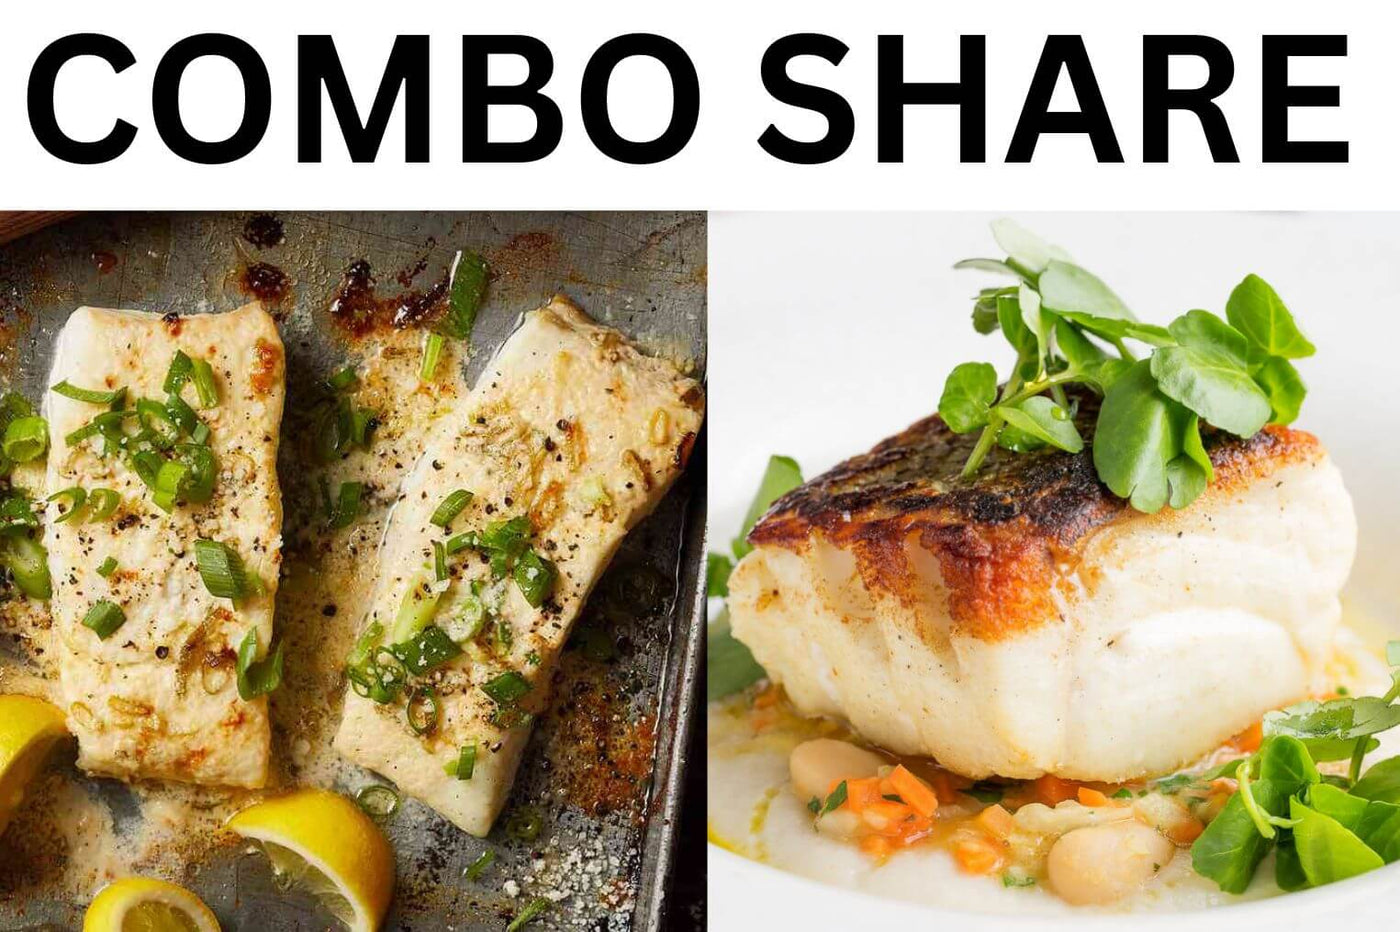 Wild Caught Alaskan Halibut and Cod Combo Seafood Share.  Showing both cooked halibut and cod ready to eat.